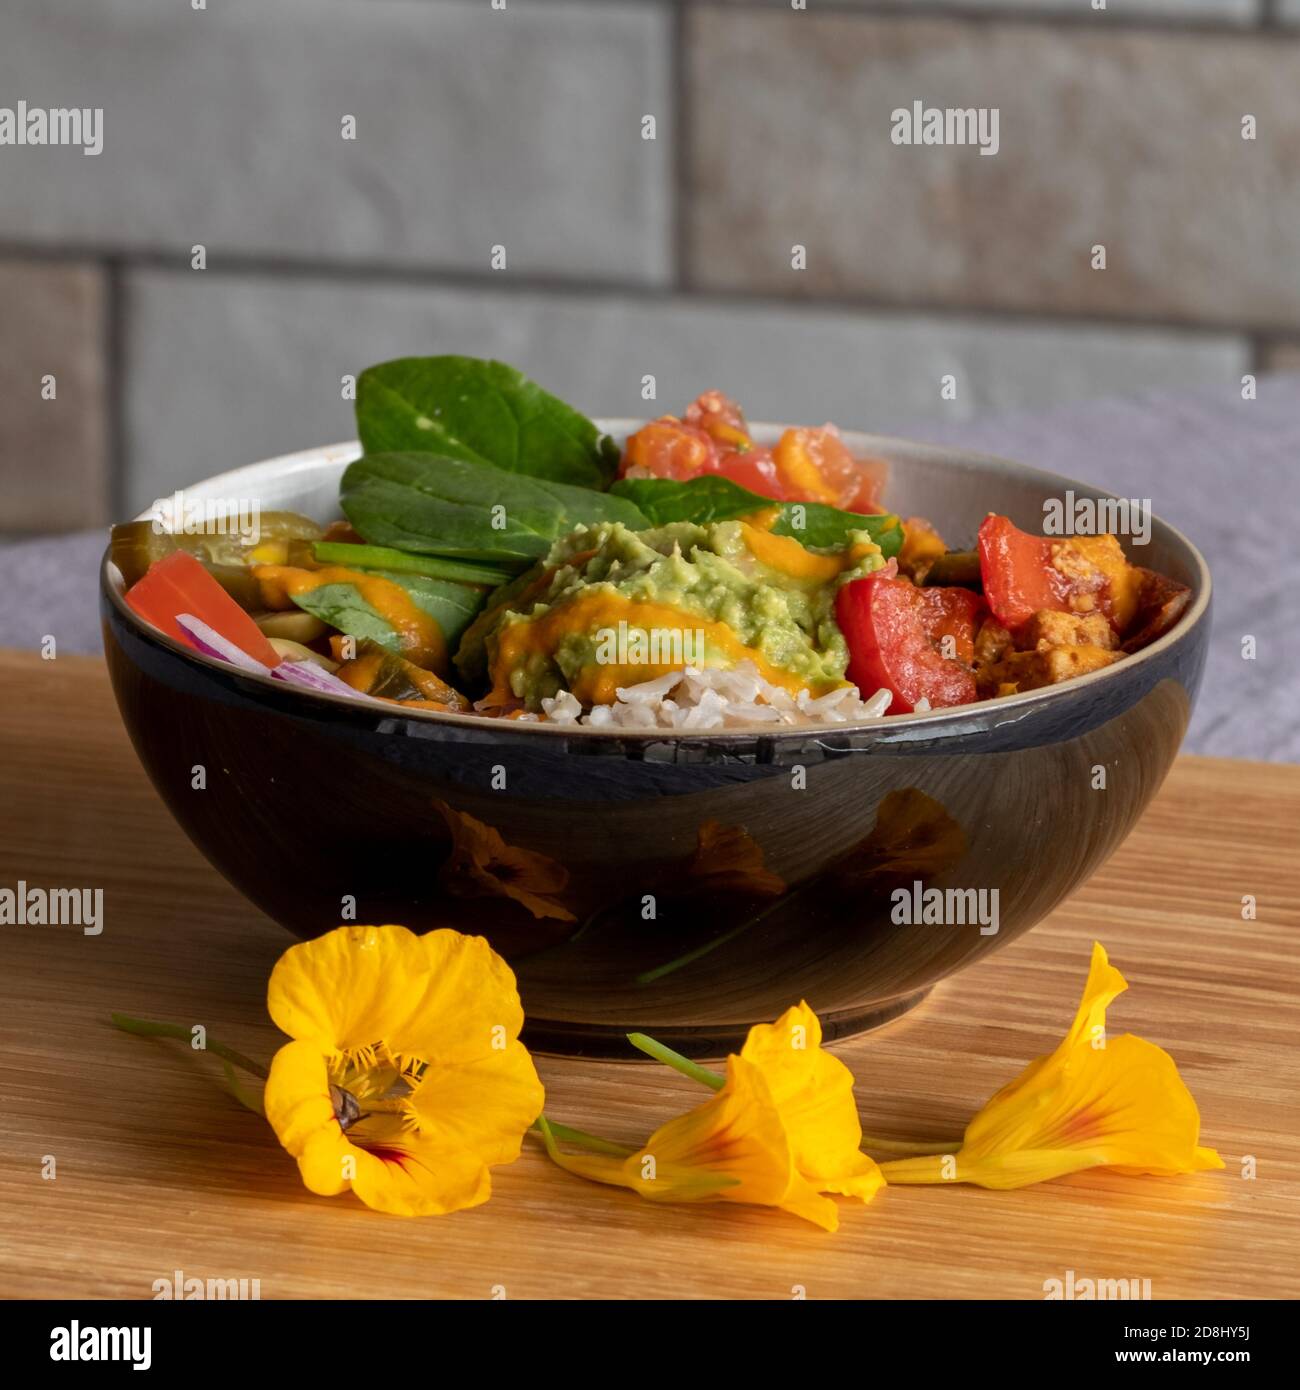 Colourful vegan bowl food with avocado, tomato, spinach leaves. Vertical view. Stock Photo